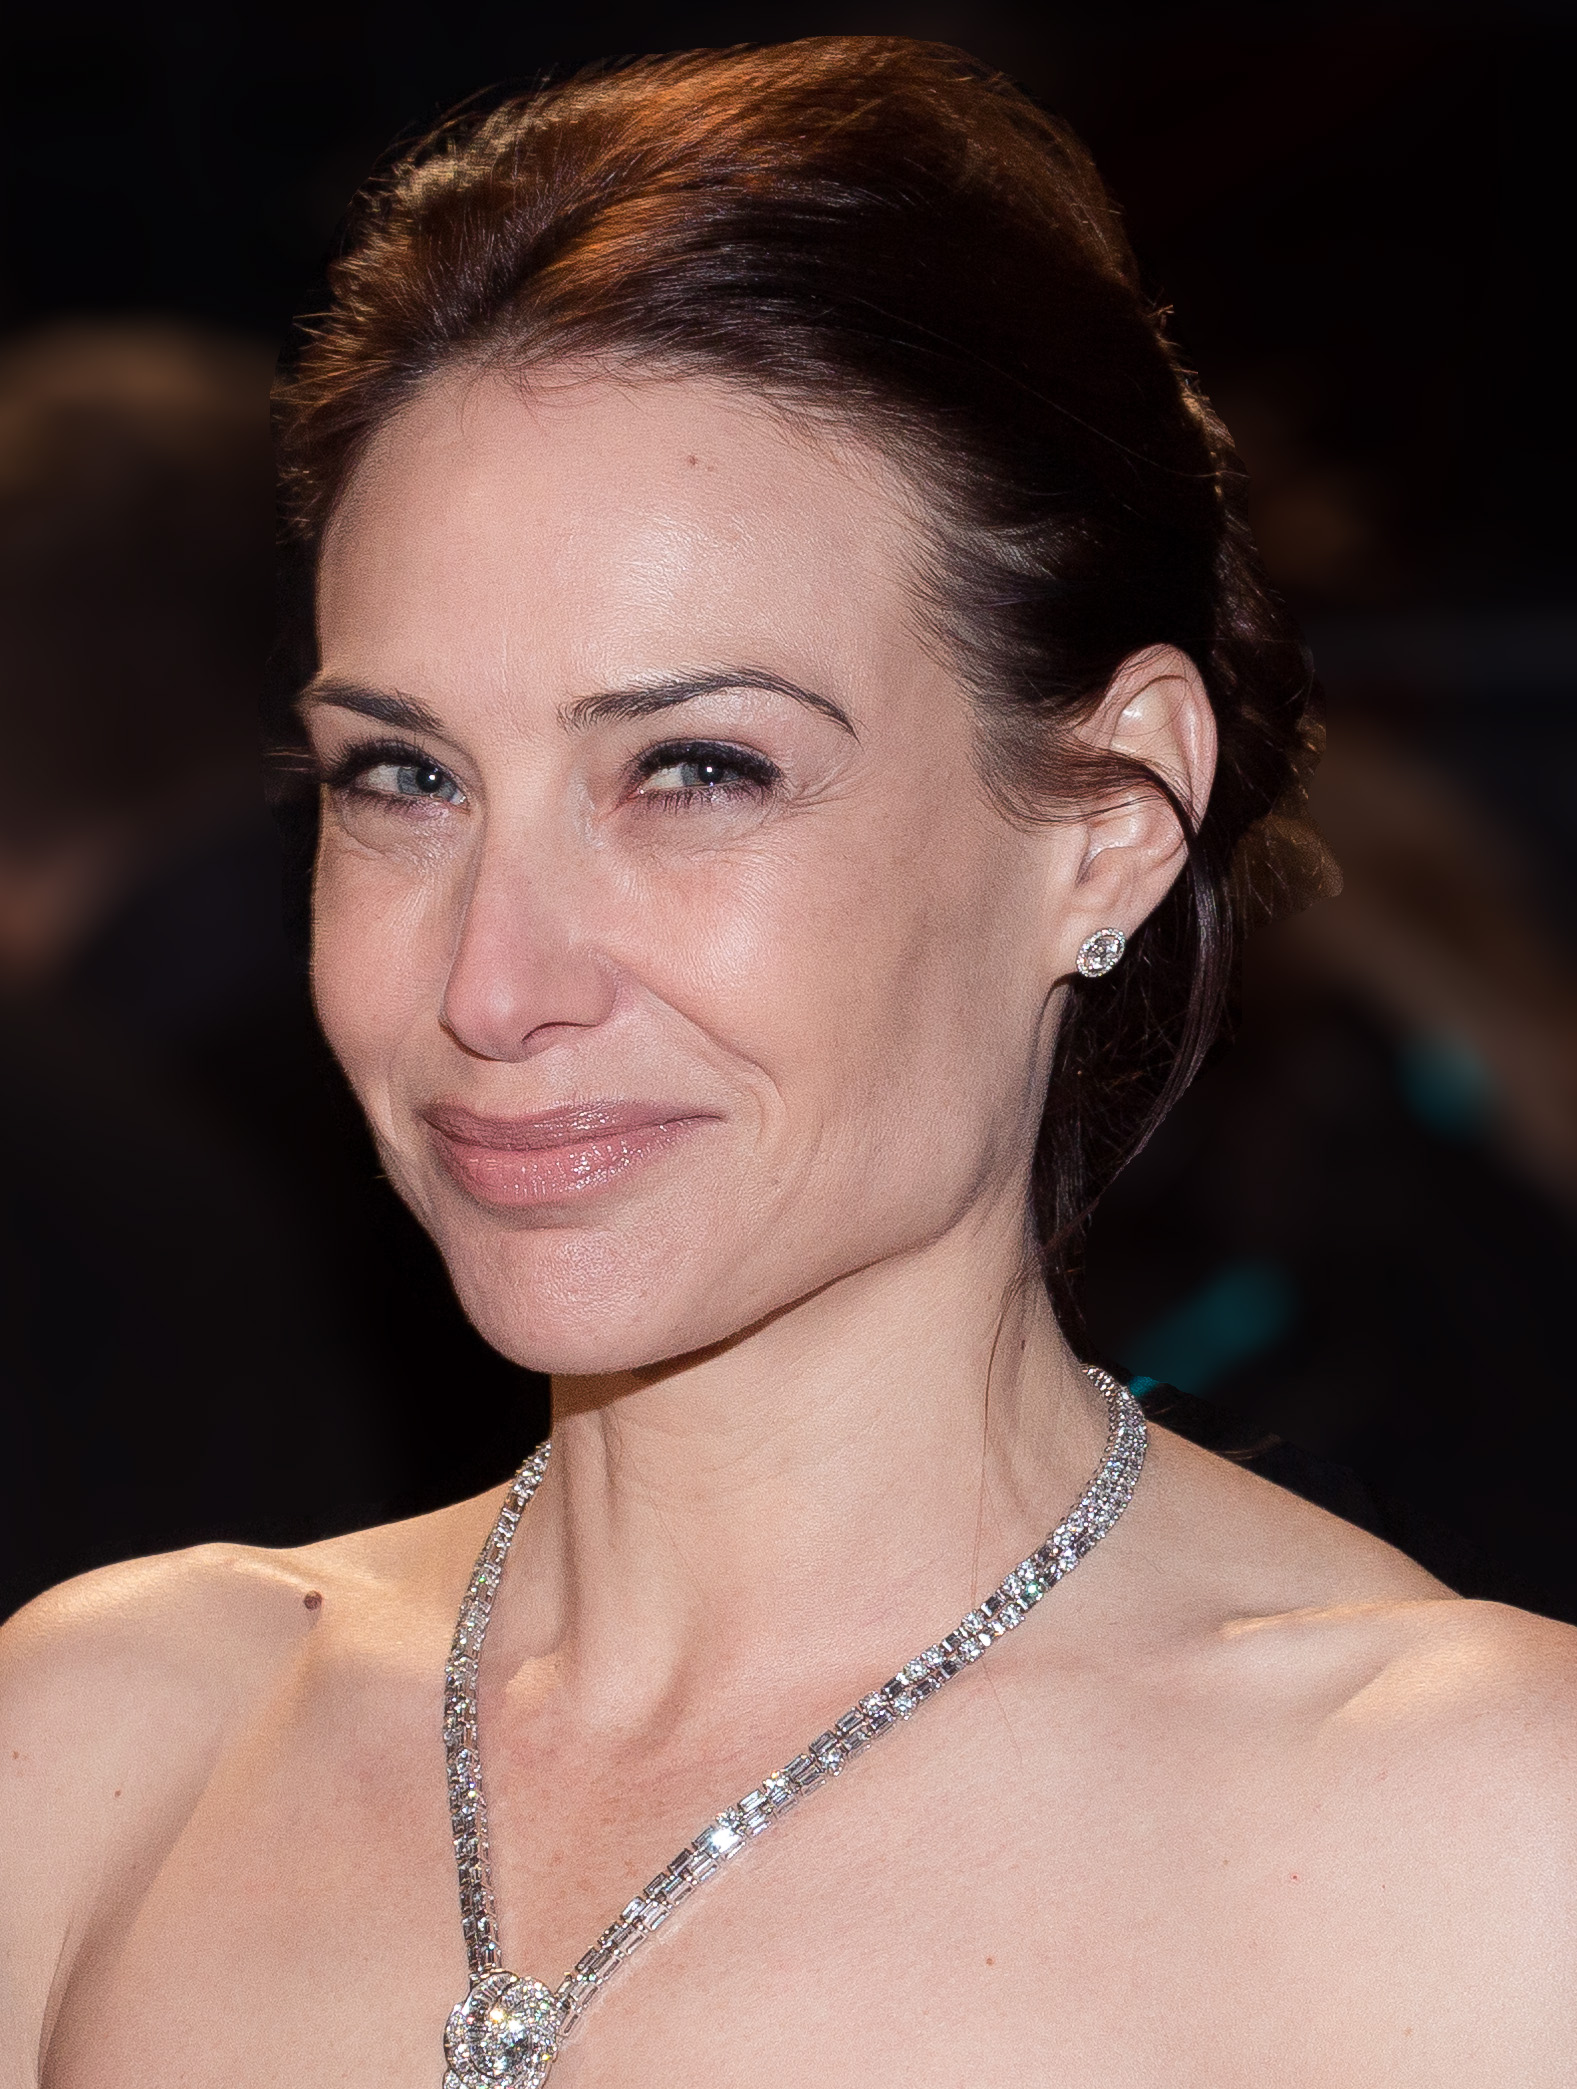 claire forlani young